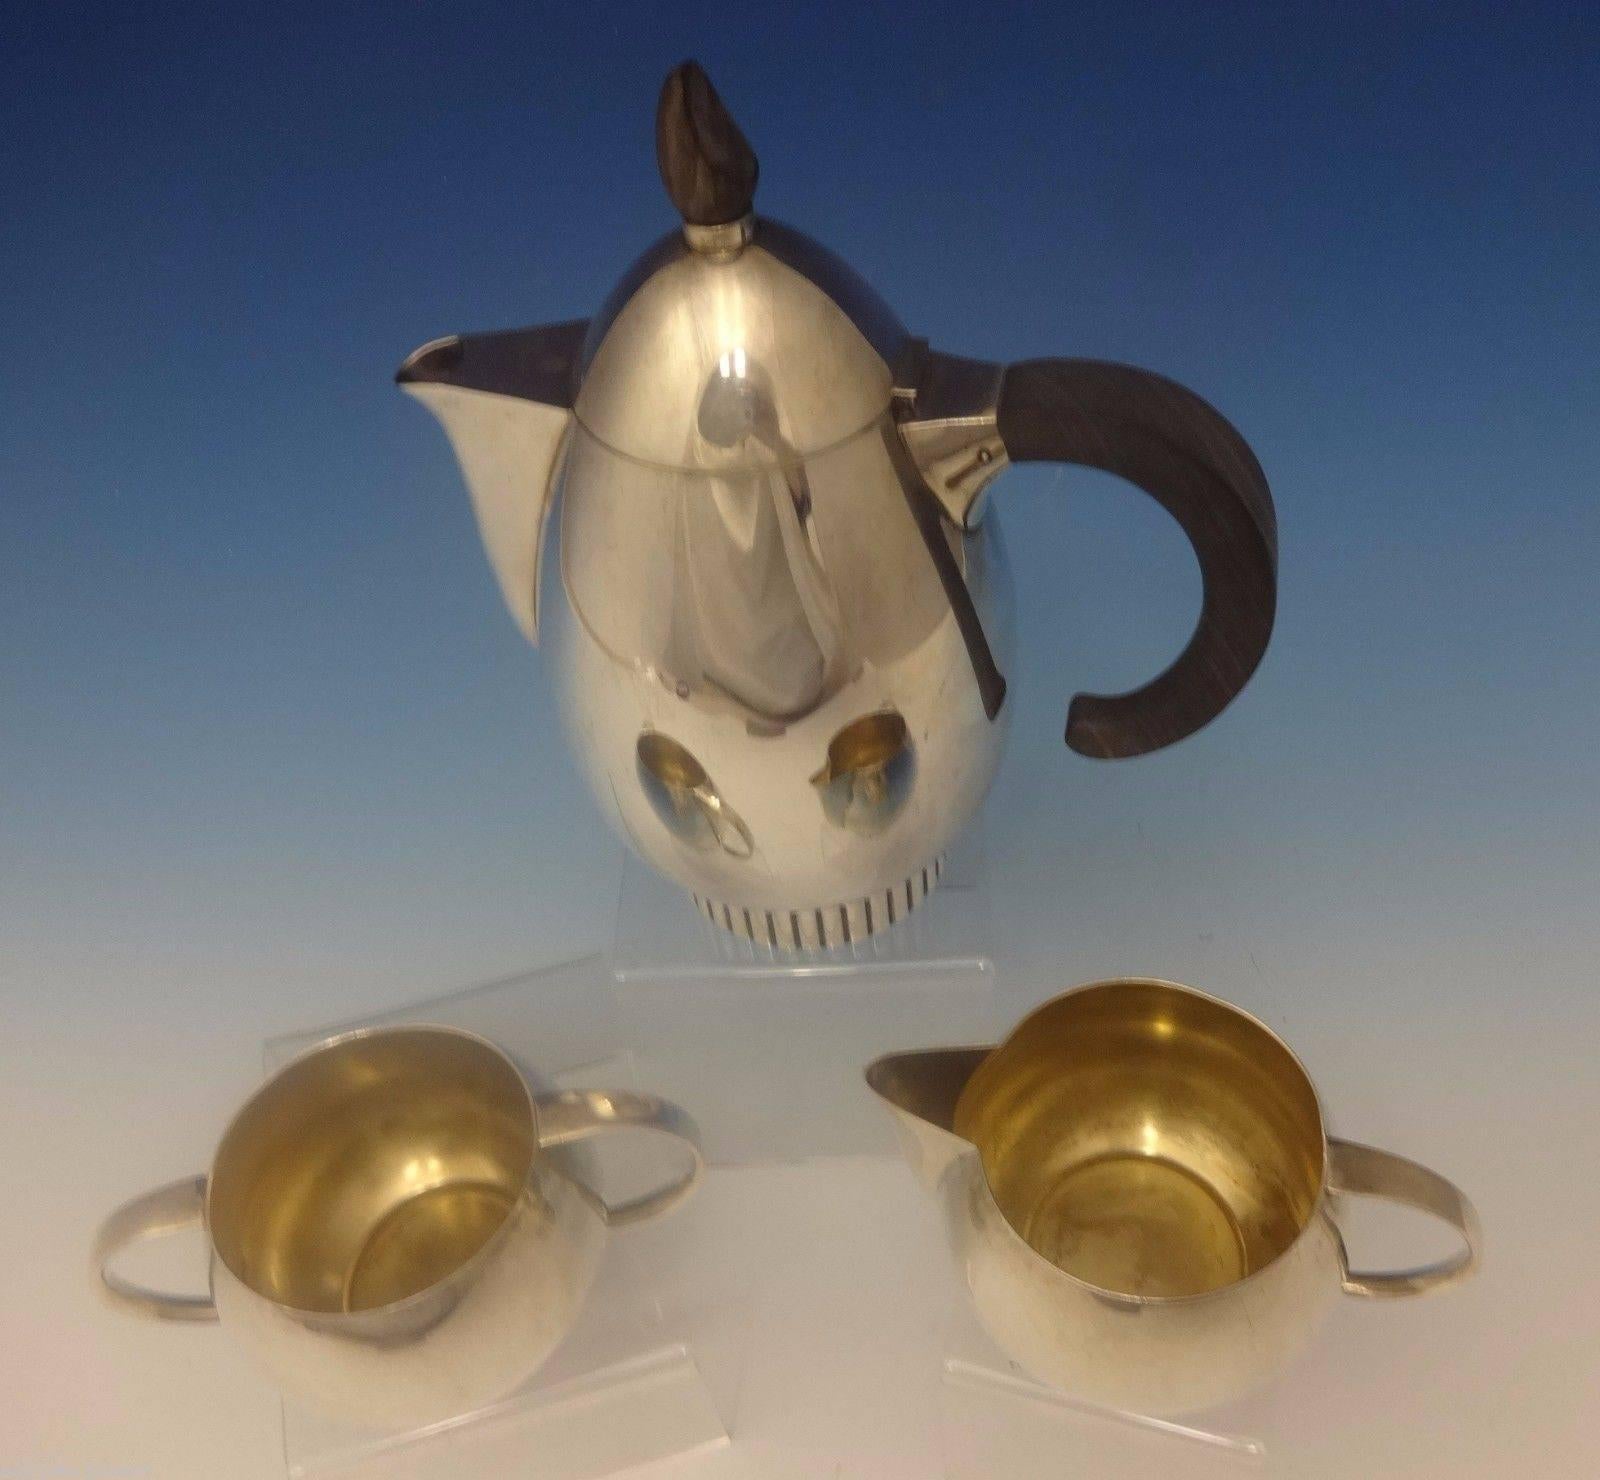 Classic beauty by Frank Smith.

Beautiful classic beauty by Frank Smith sterling silver three-piece tea set. It is marked #725. The set includes: 

Coffee pot: Has an ebony wood handle and measures 8 3/4